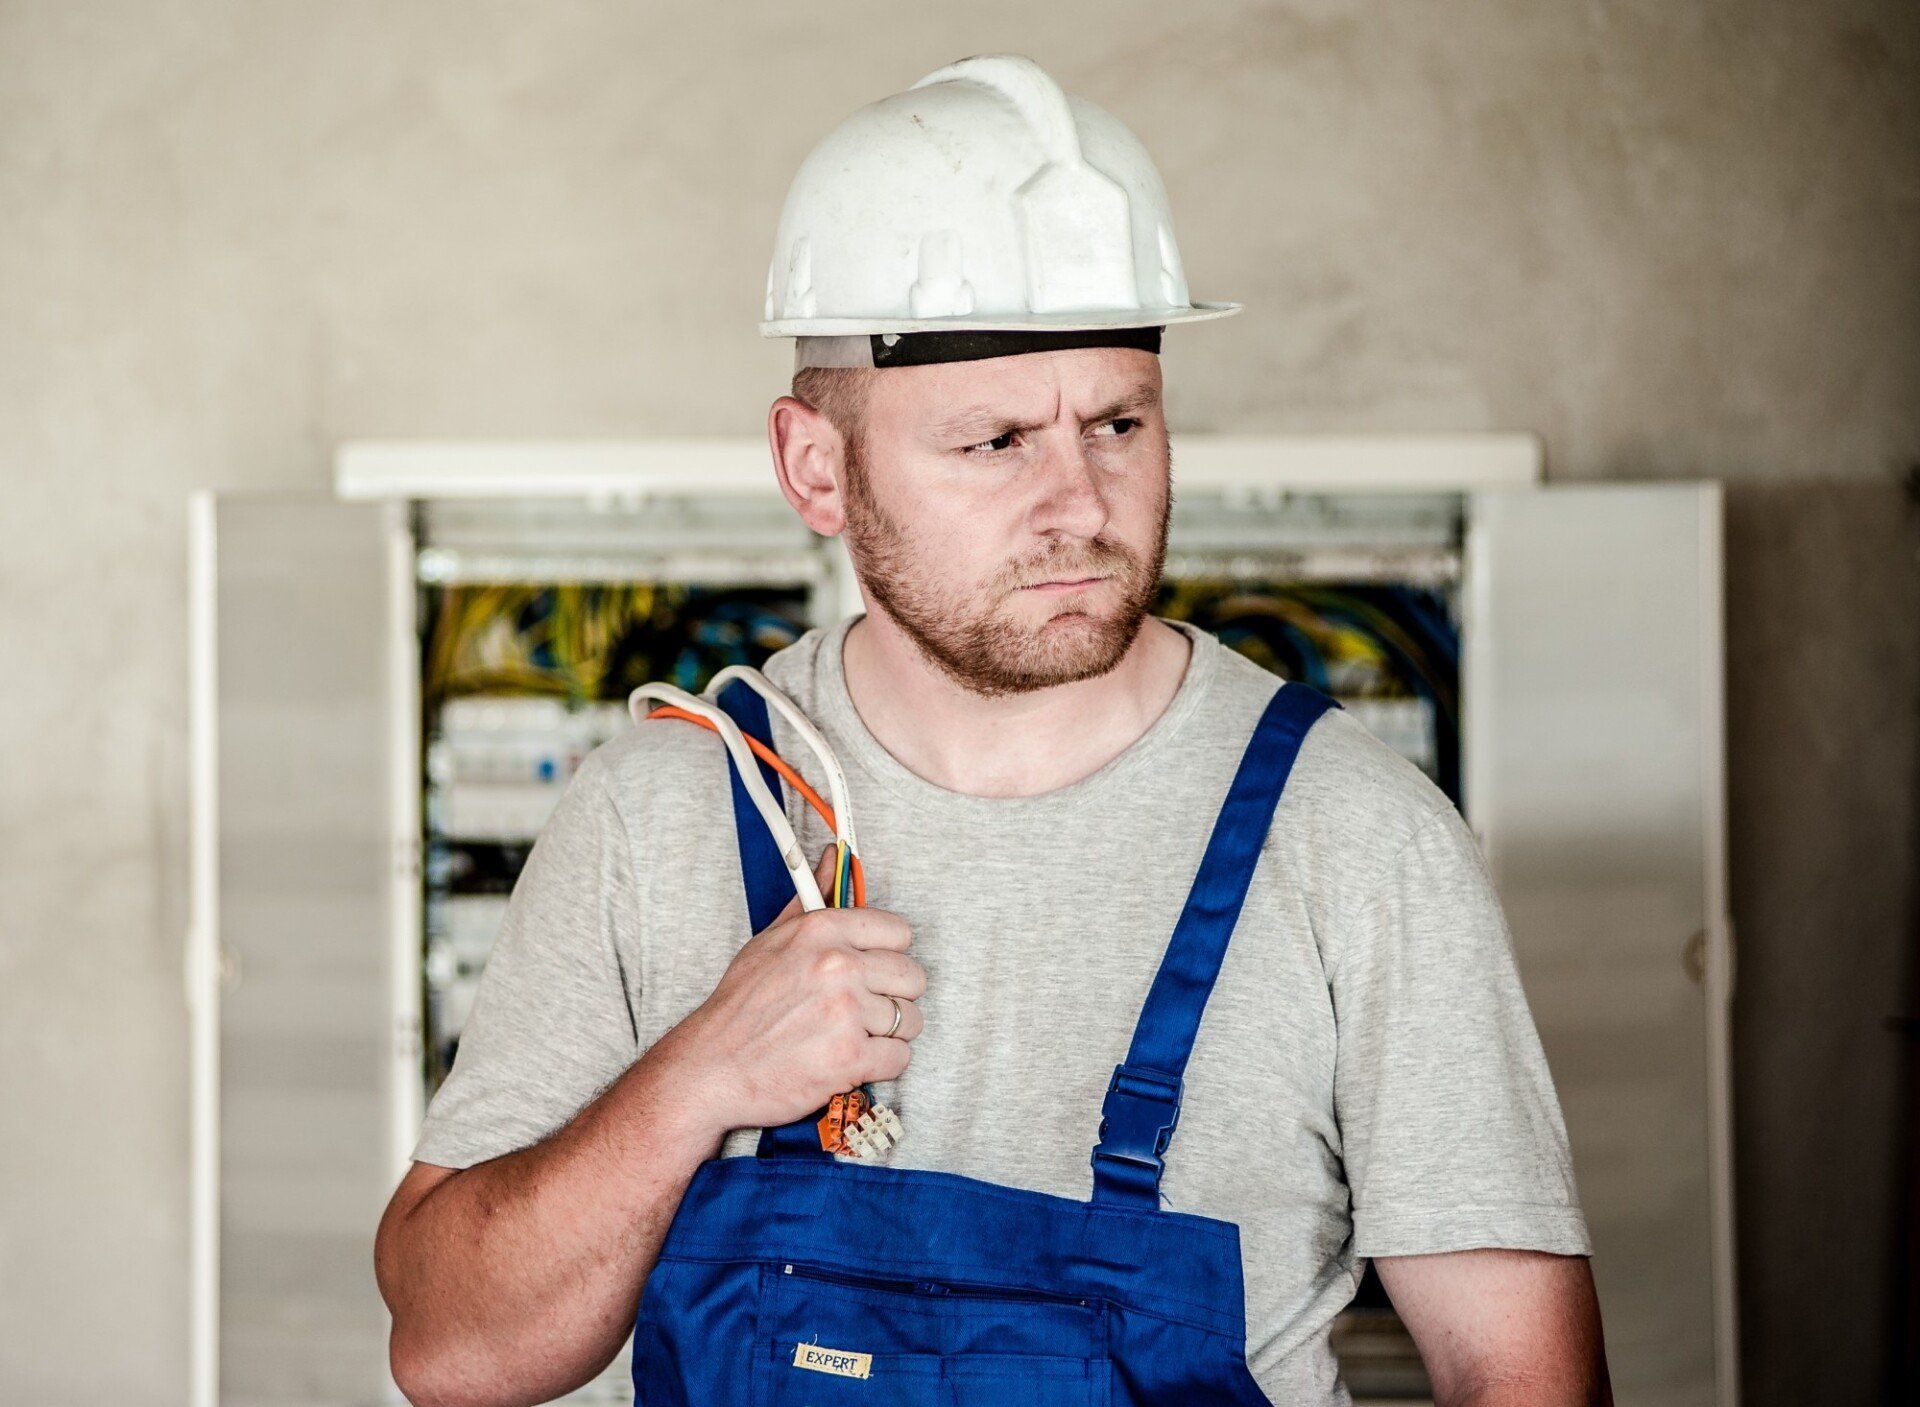 man in hard hat and overalls